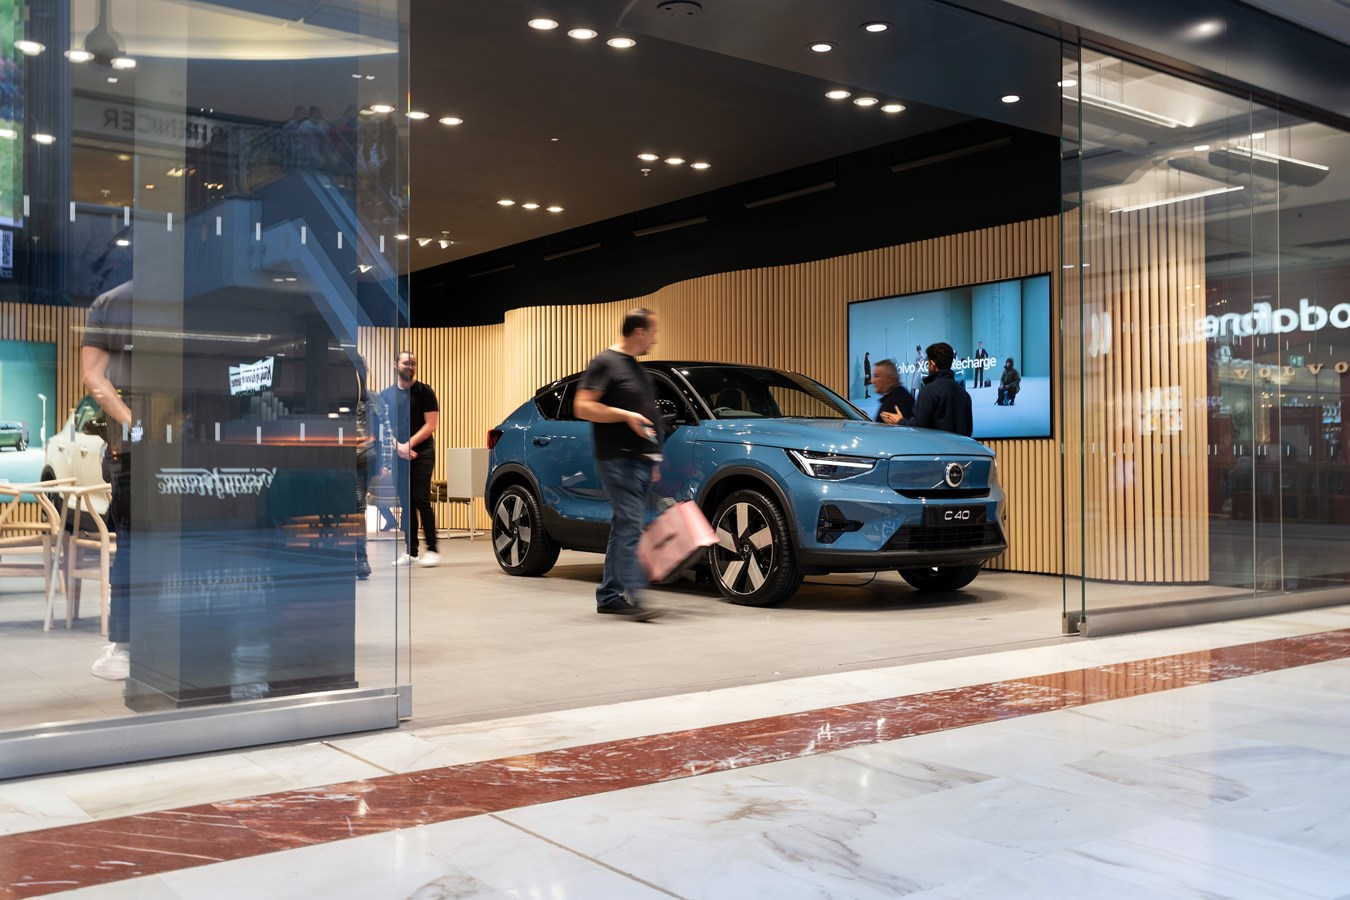 New Volvo Studio opens to showcase electric cars at Brent Cross